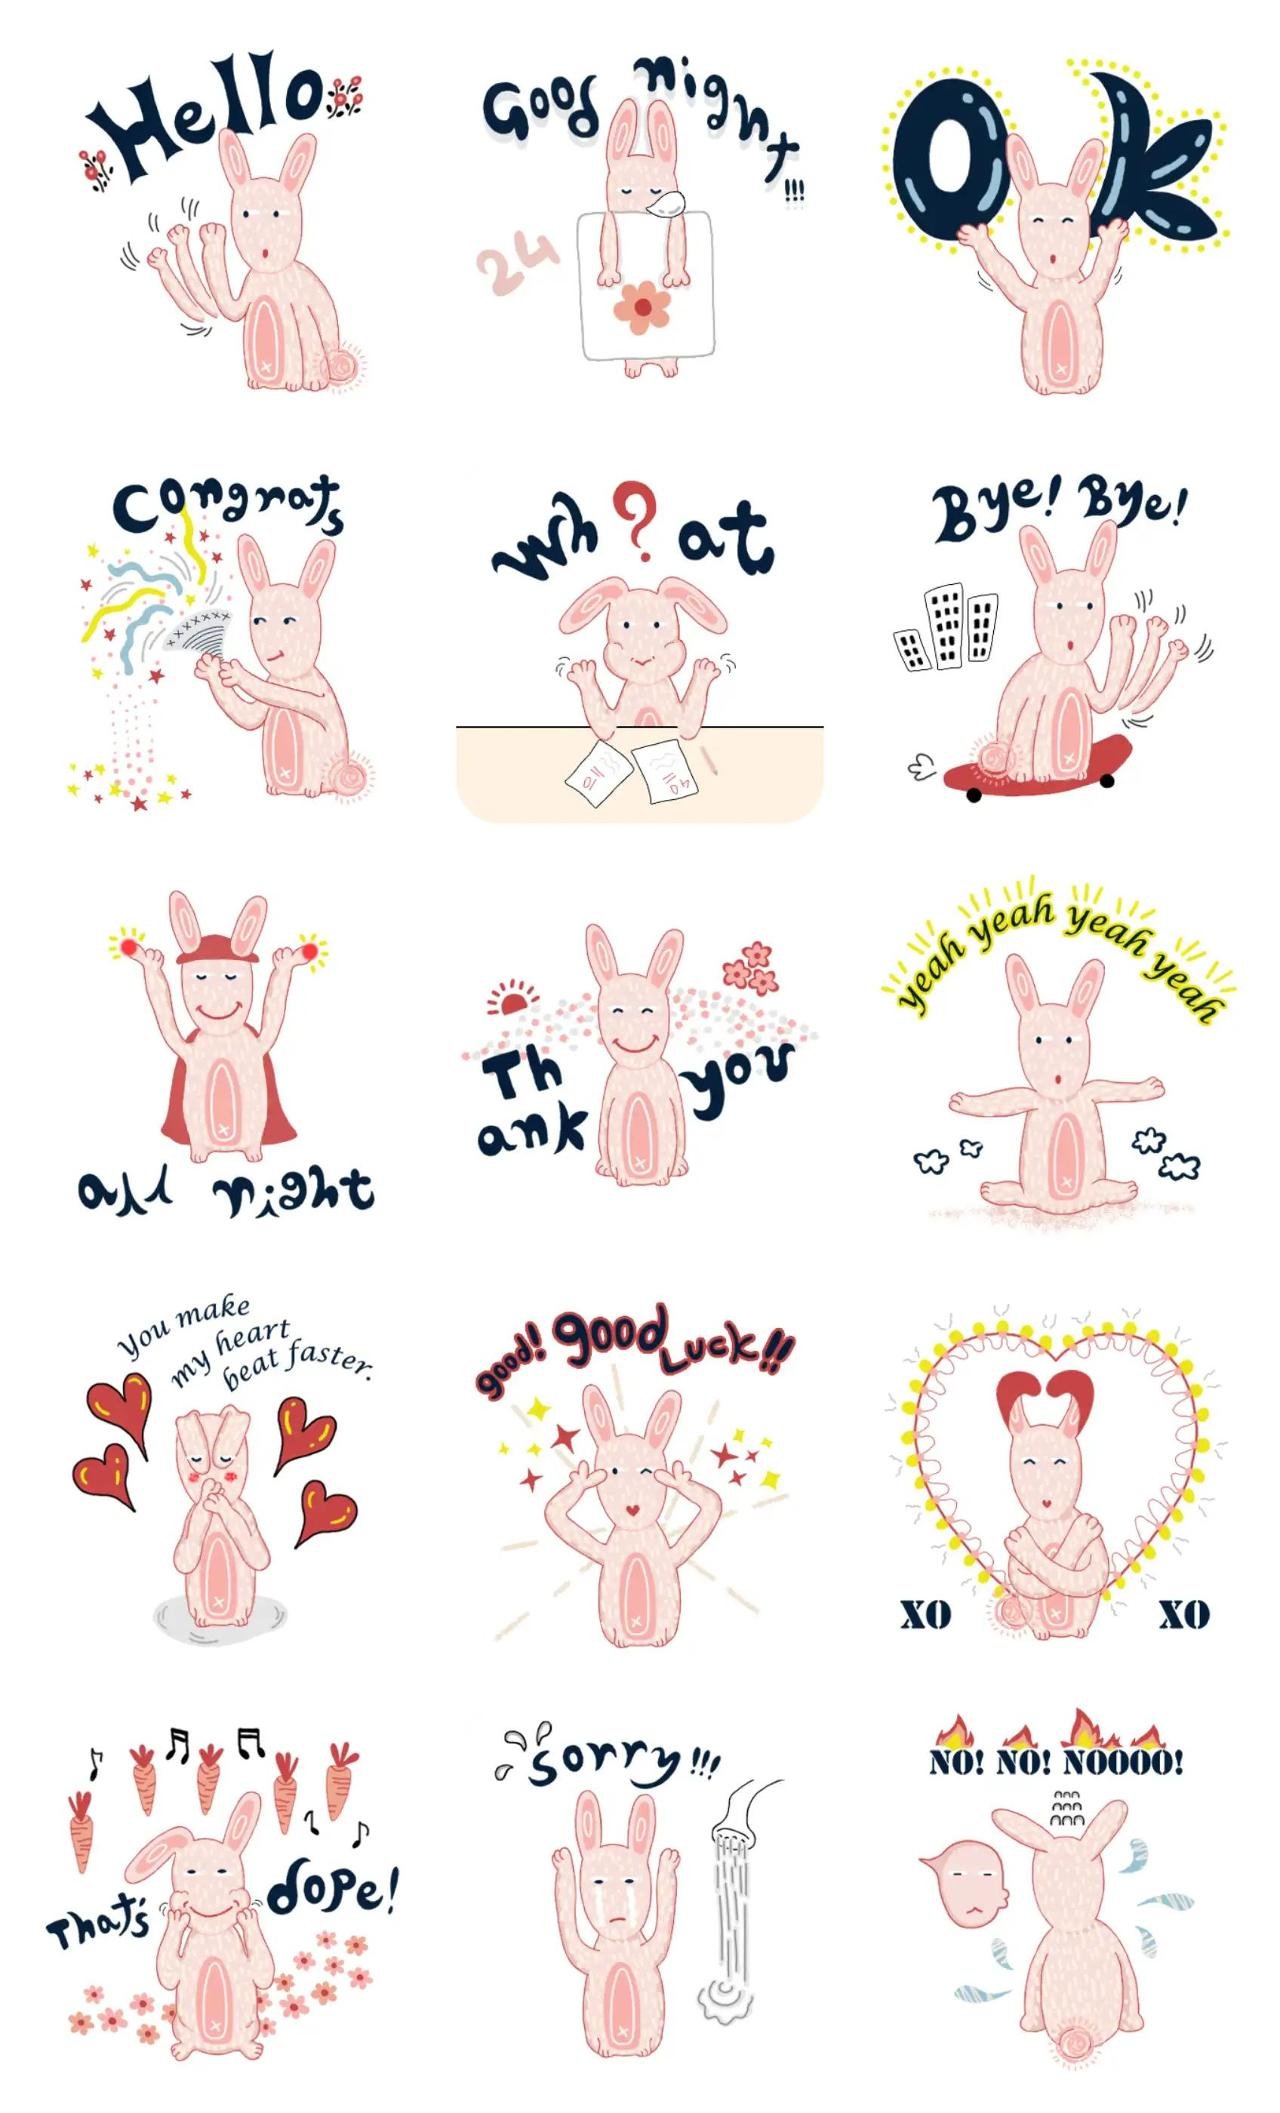 Lucky bonghee Animals,Etc. sticker pack for Whatsapp, Telegram, Signal, and others chatting and message apps